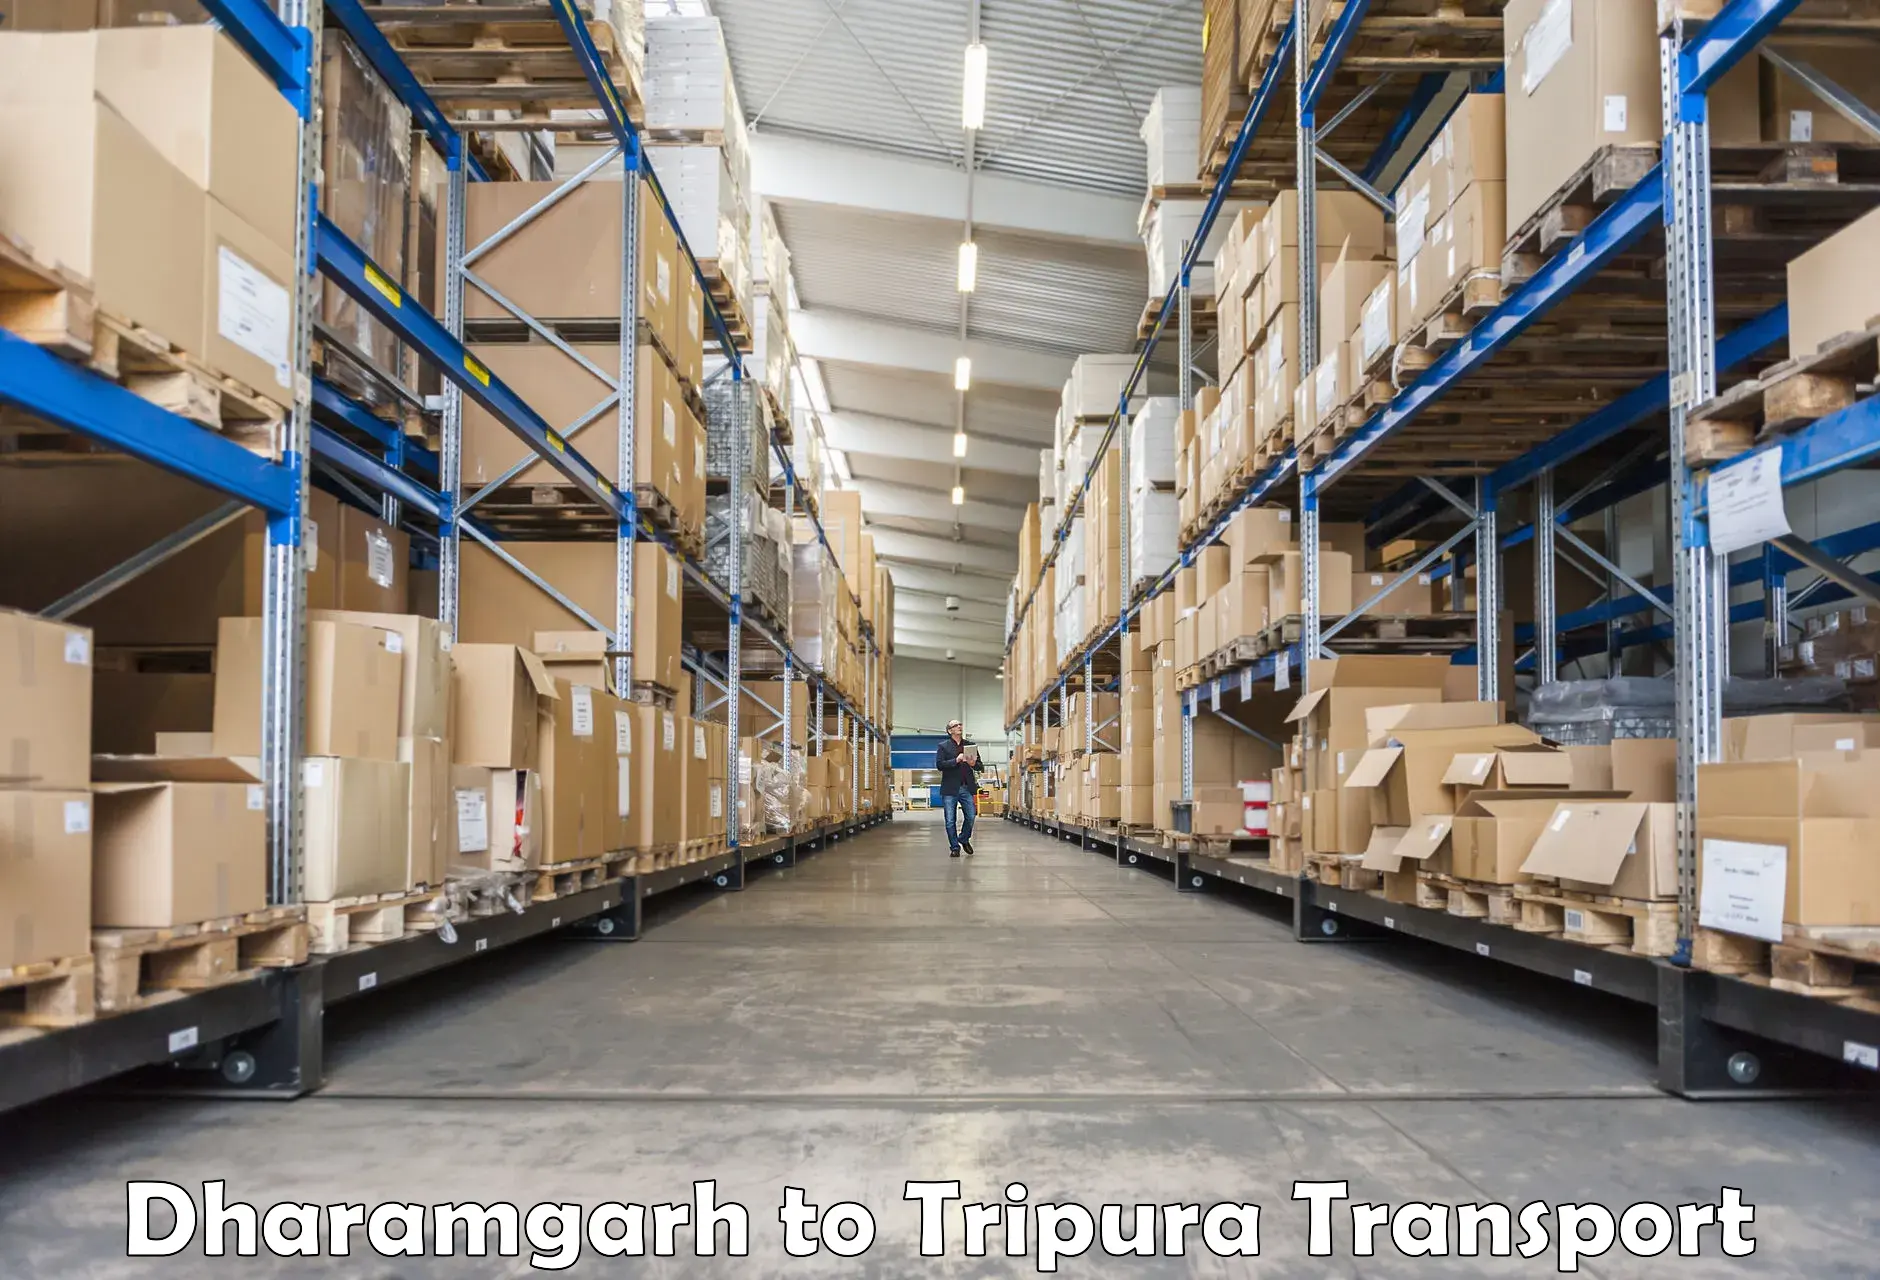 Daily parcel service transport Dharamgarh to Udaipur Tripura